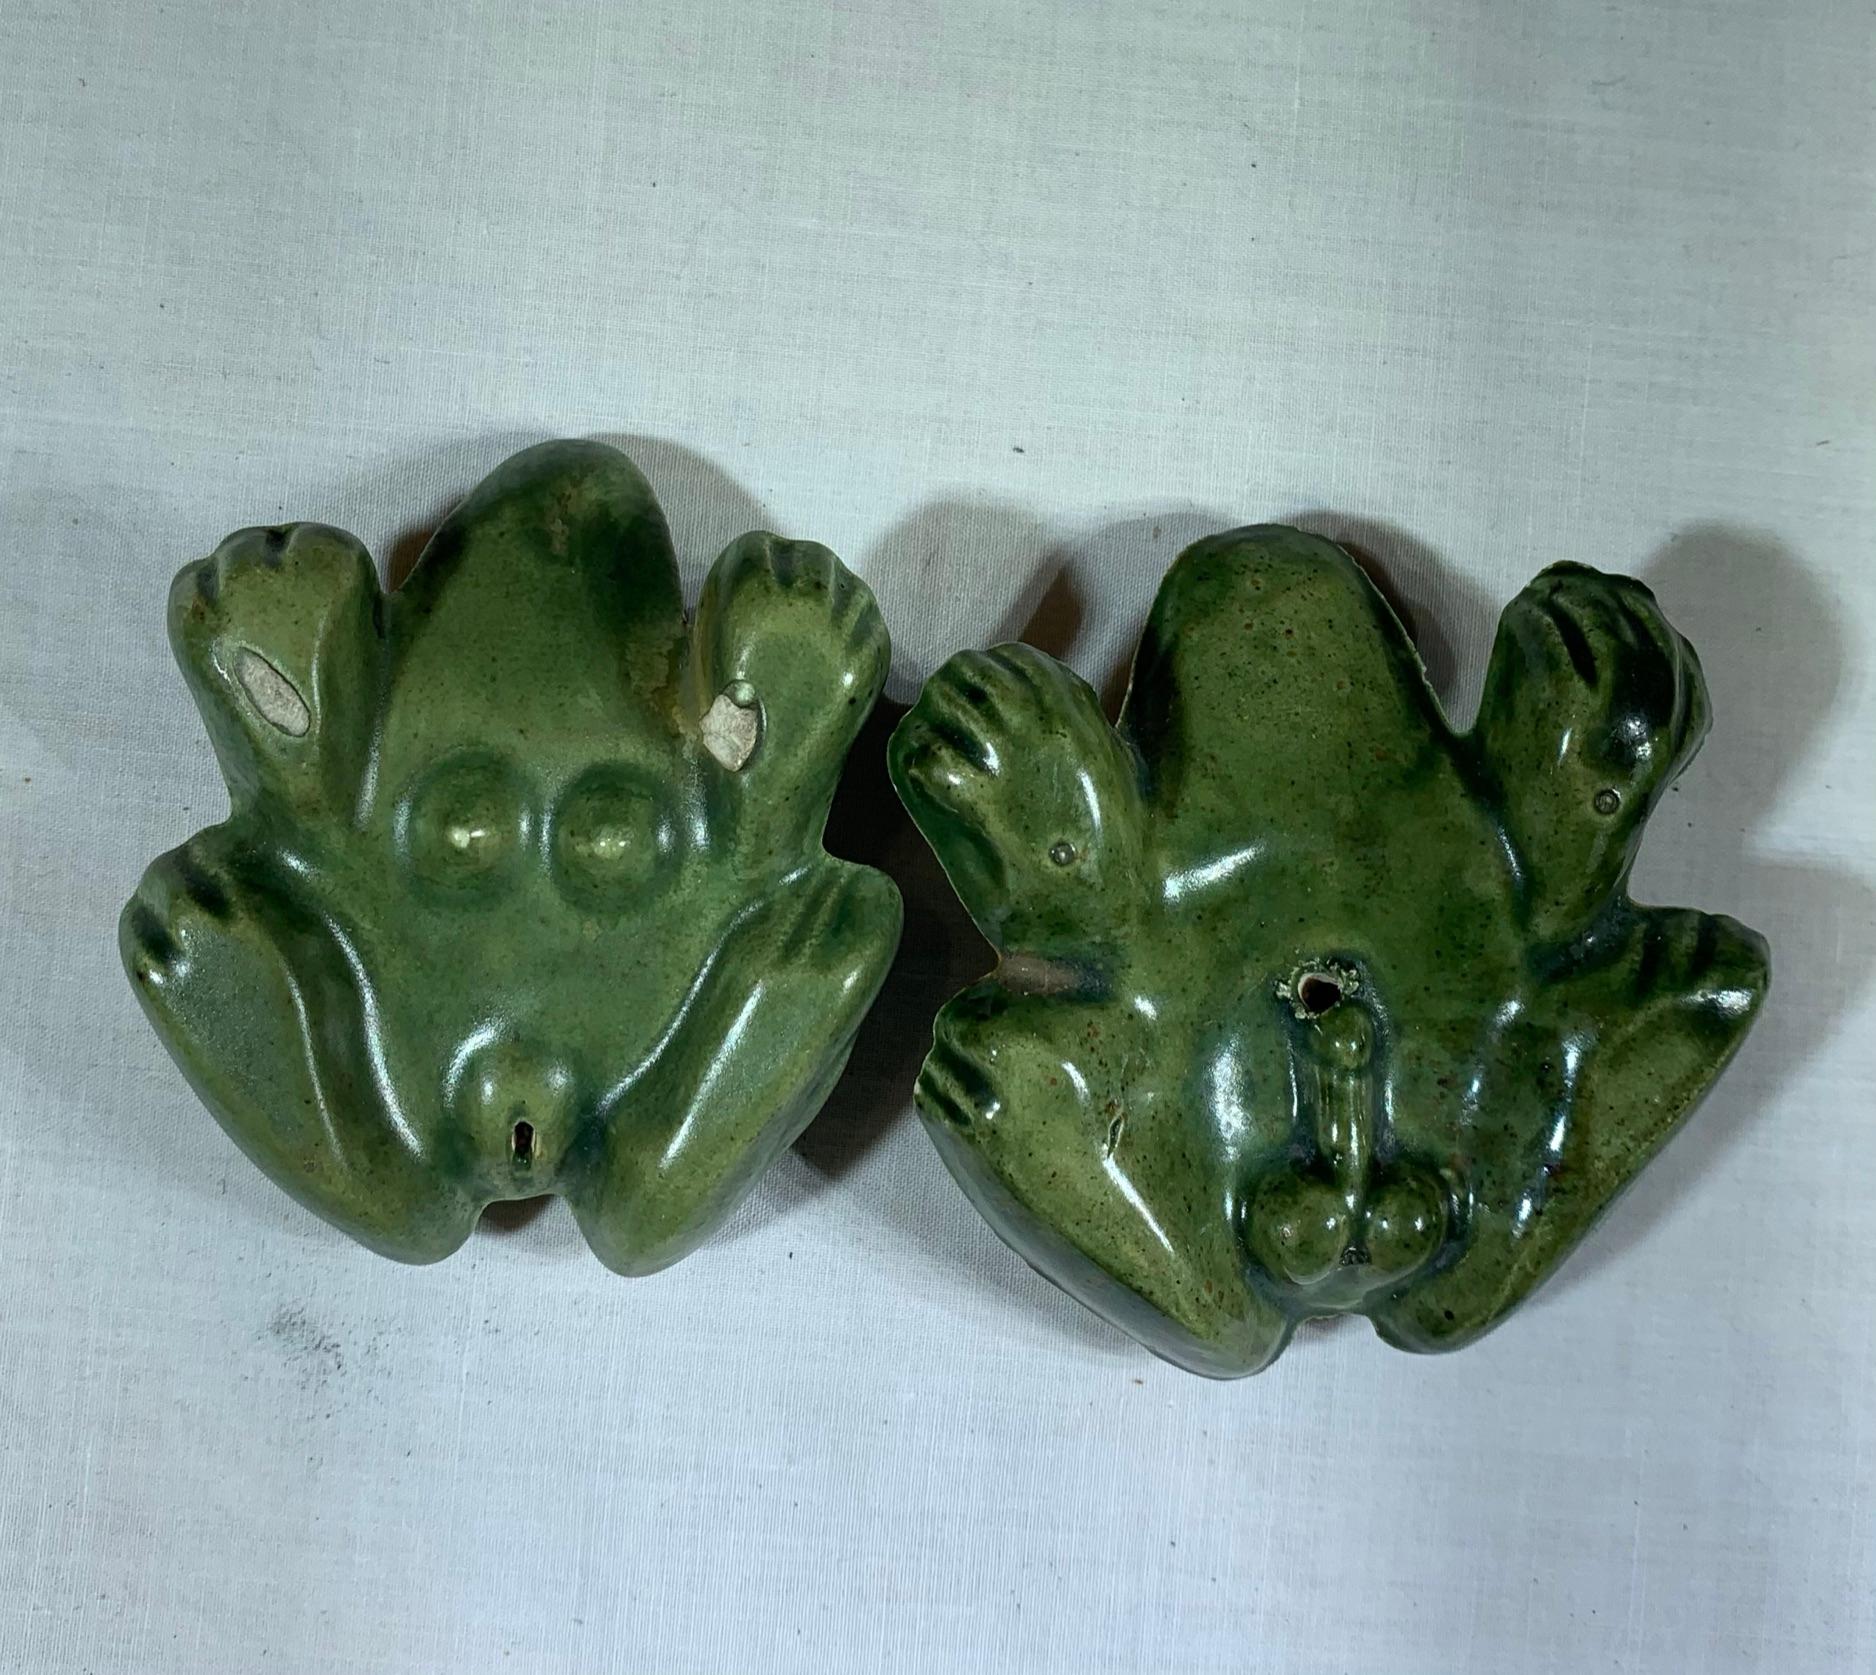 Baileys Collector Glasses, Thread Holder & Ceramic "Surprise" Frogs